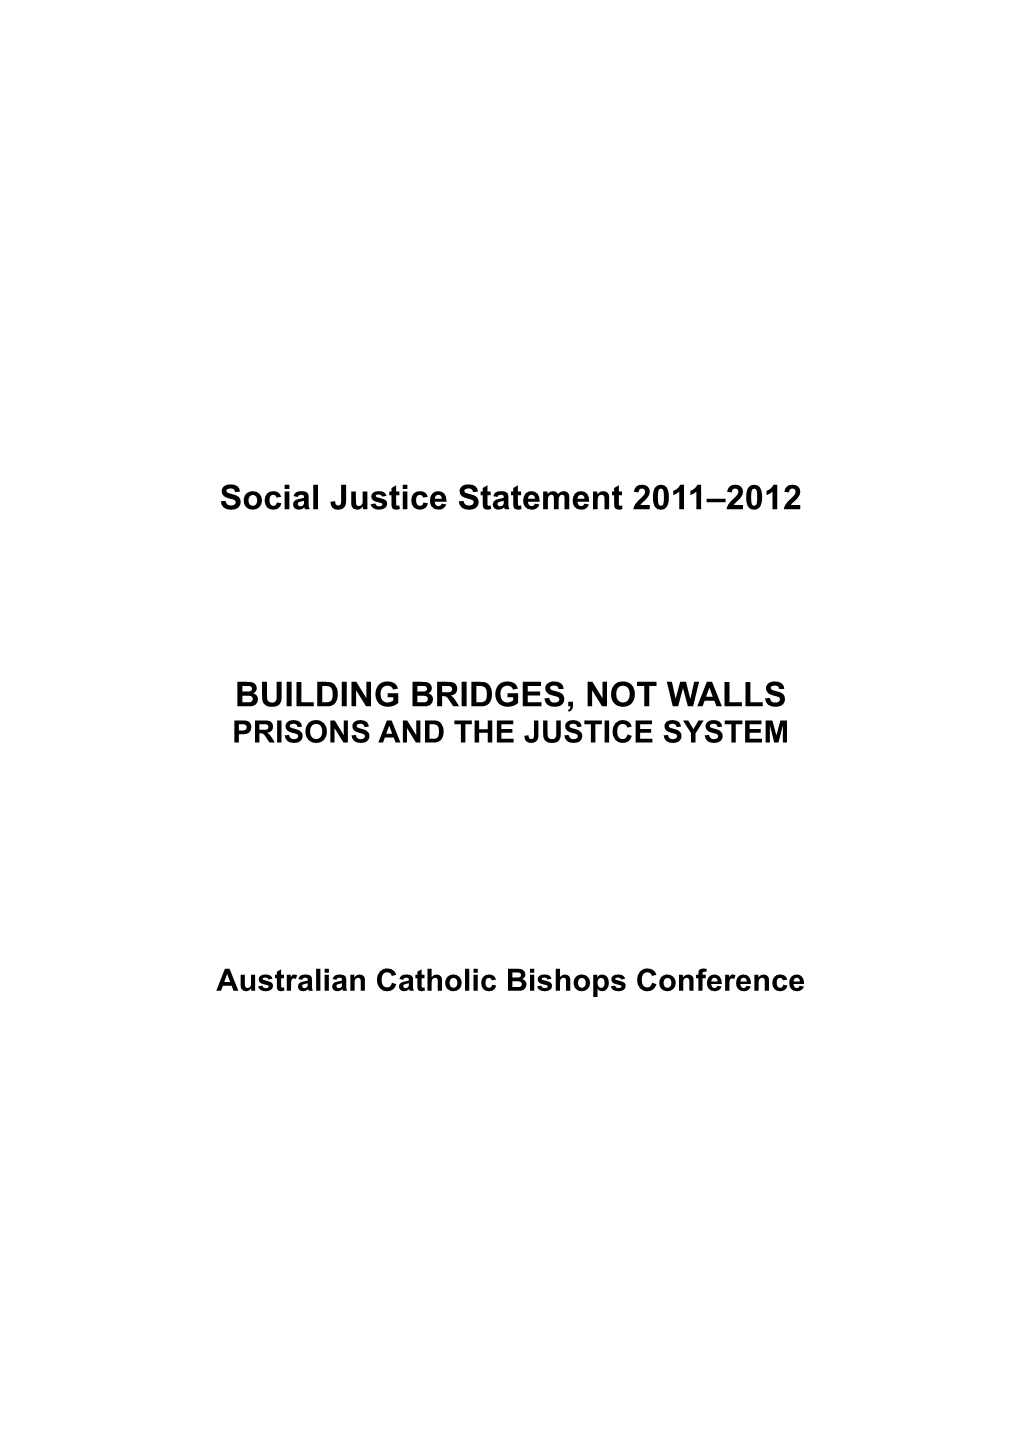 Social Justice Statement 2011 2012 Building Bridges, Not Walls: Prisons and the Justice System